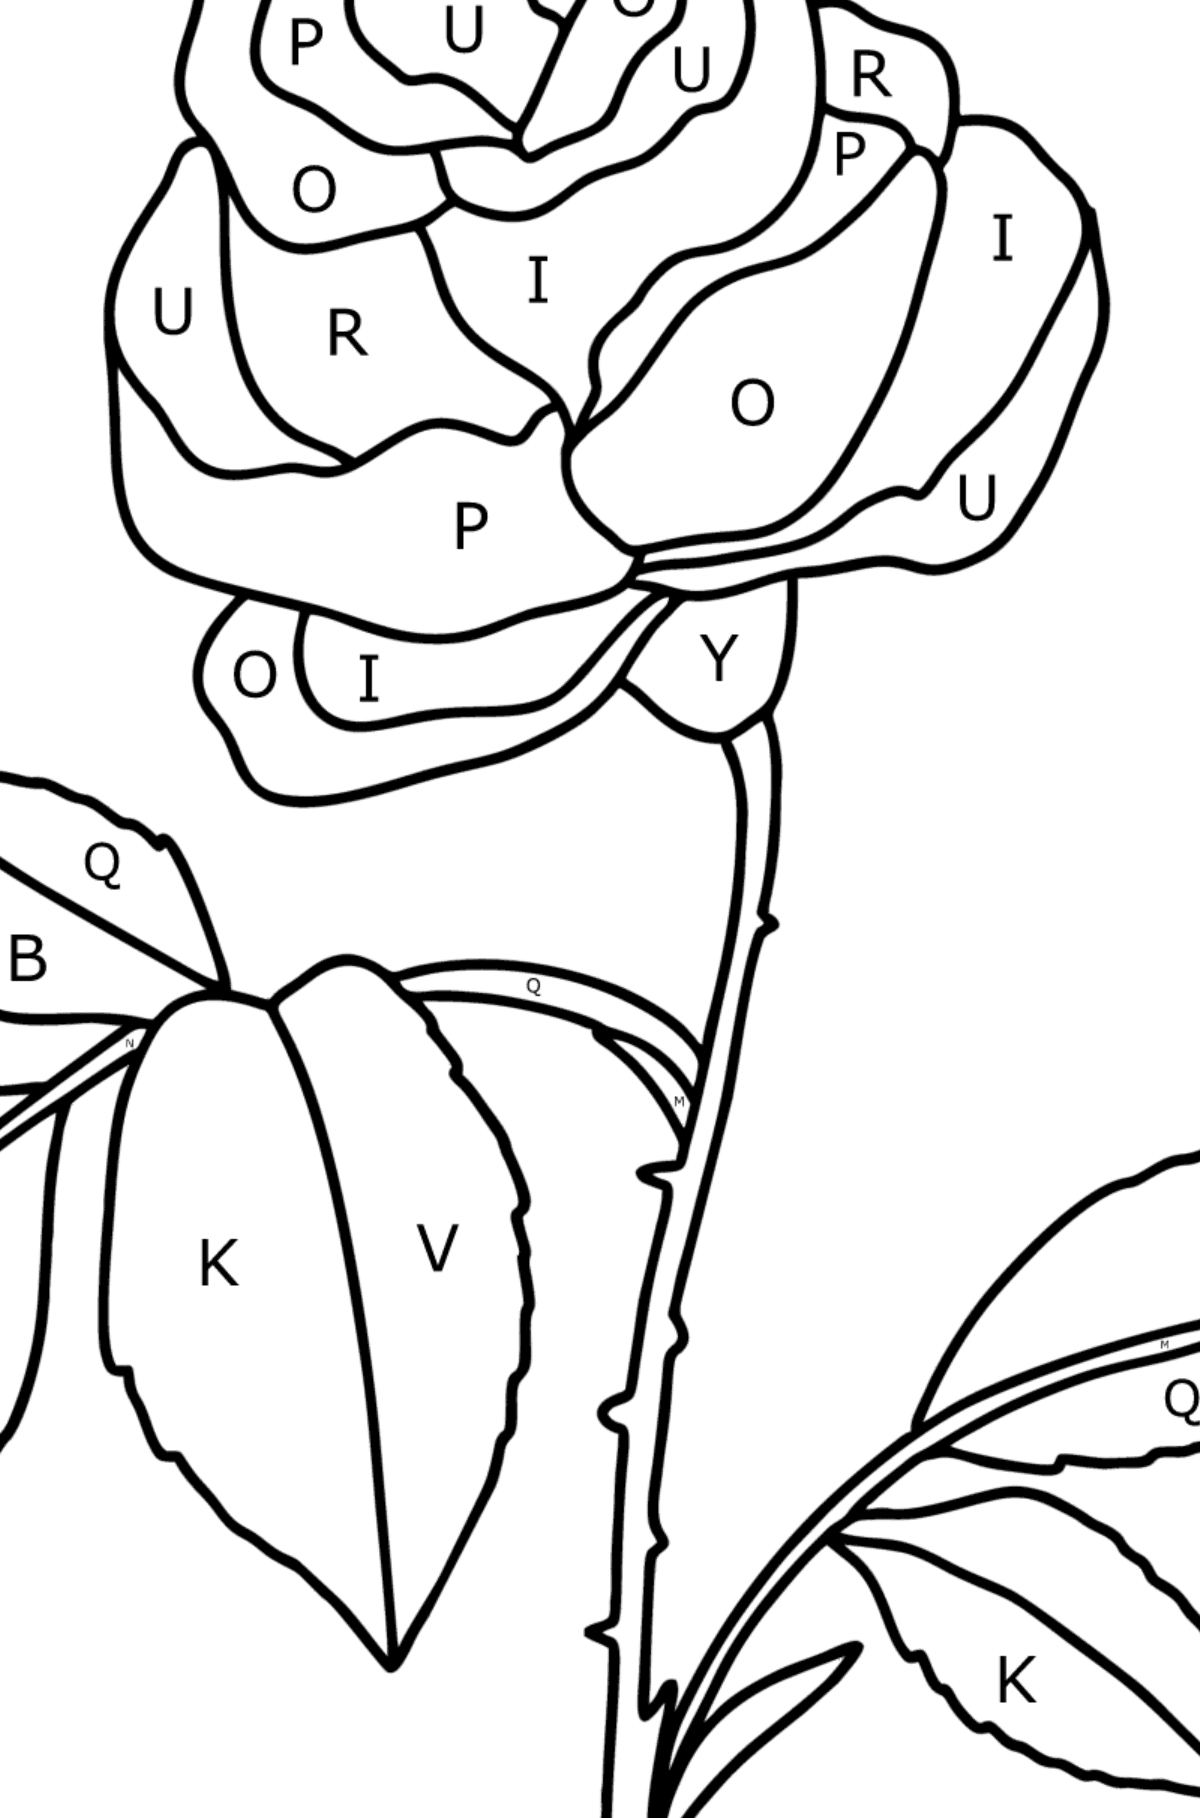 Red rose coloring page - Coloring by Letters for Kids